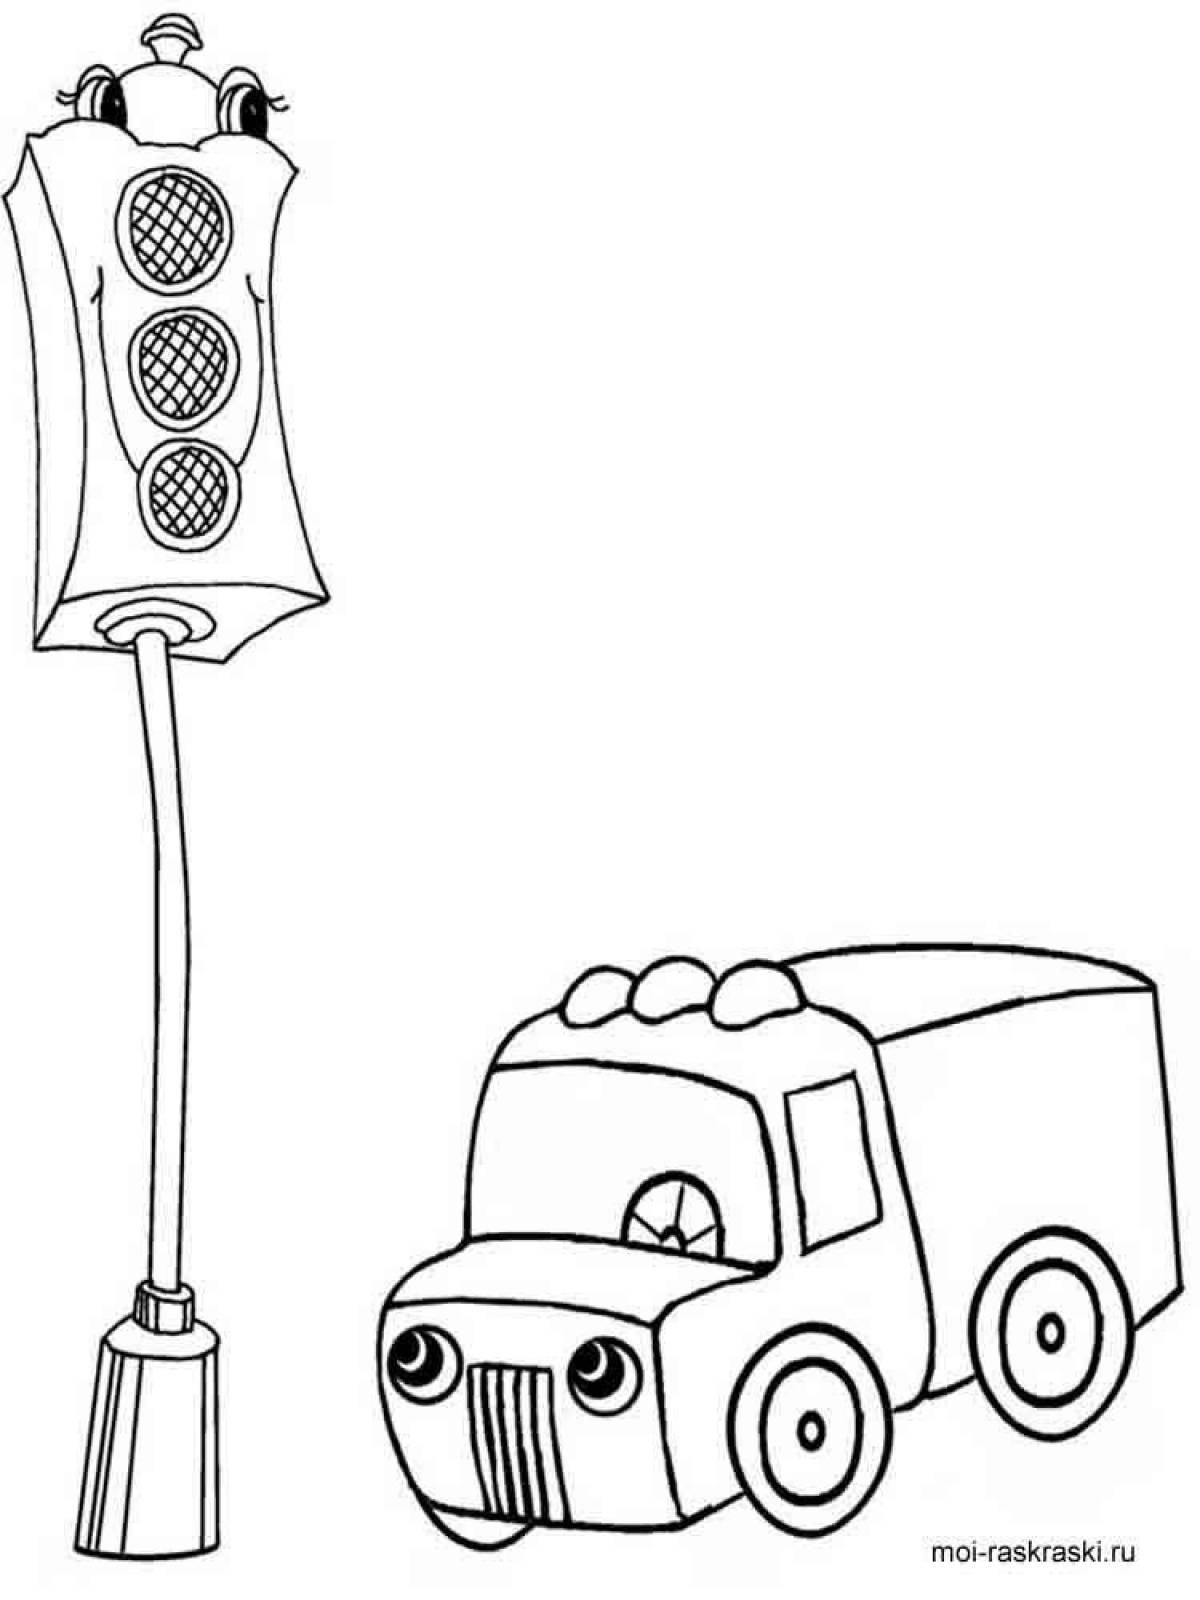 Adorable traffic light coloring book for 3-4 year olds